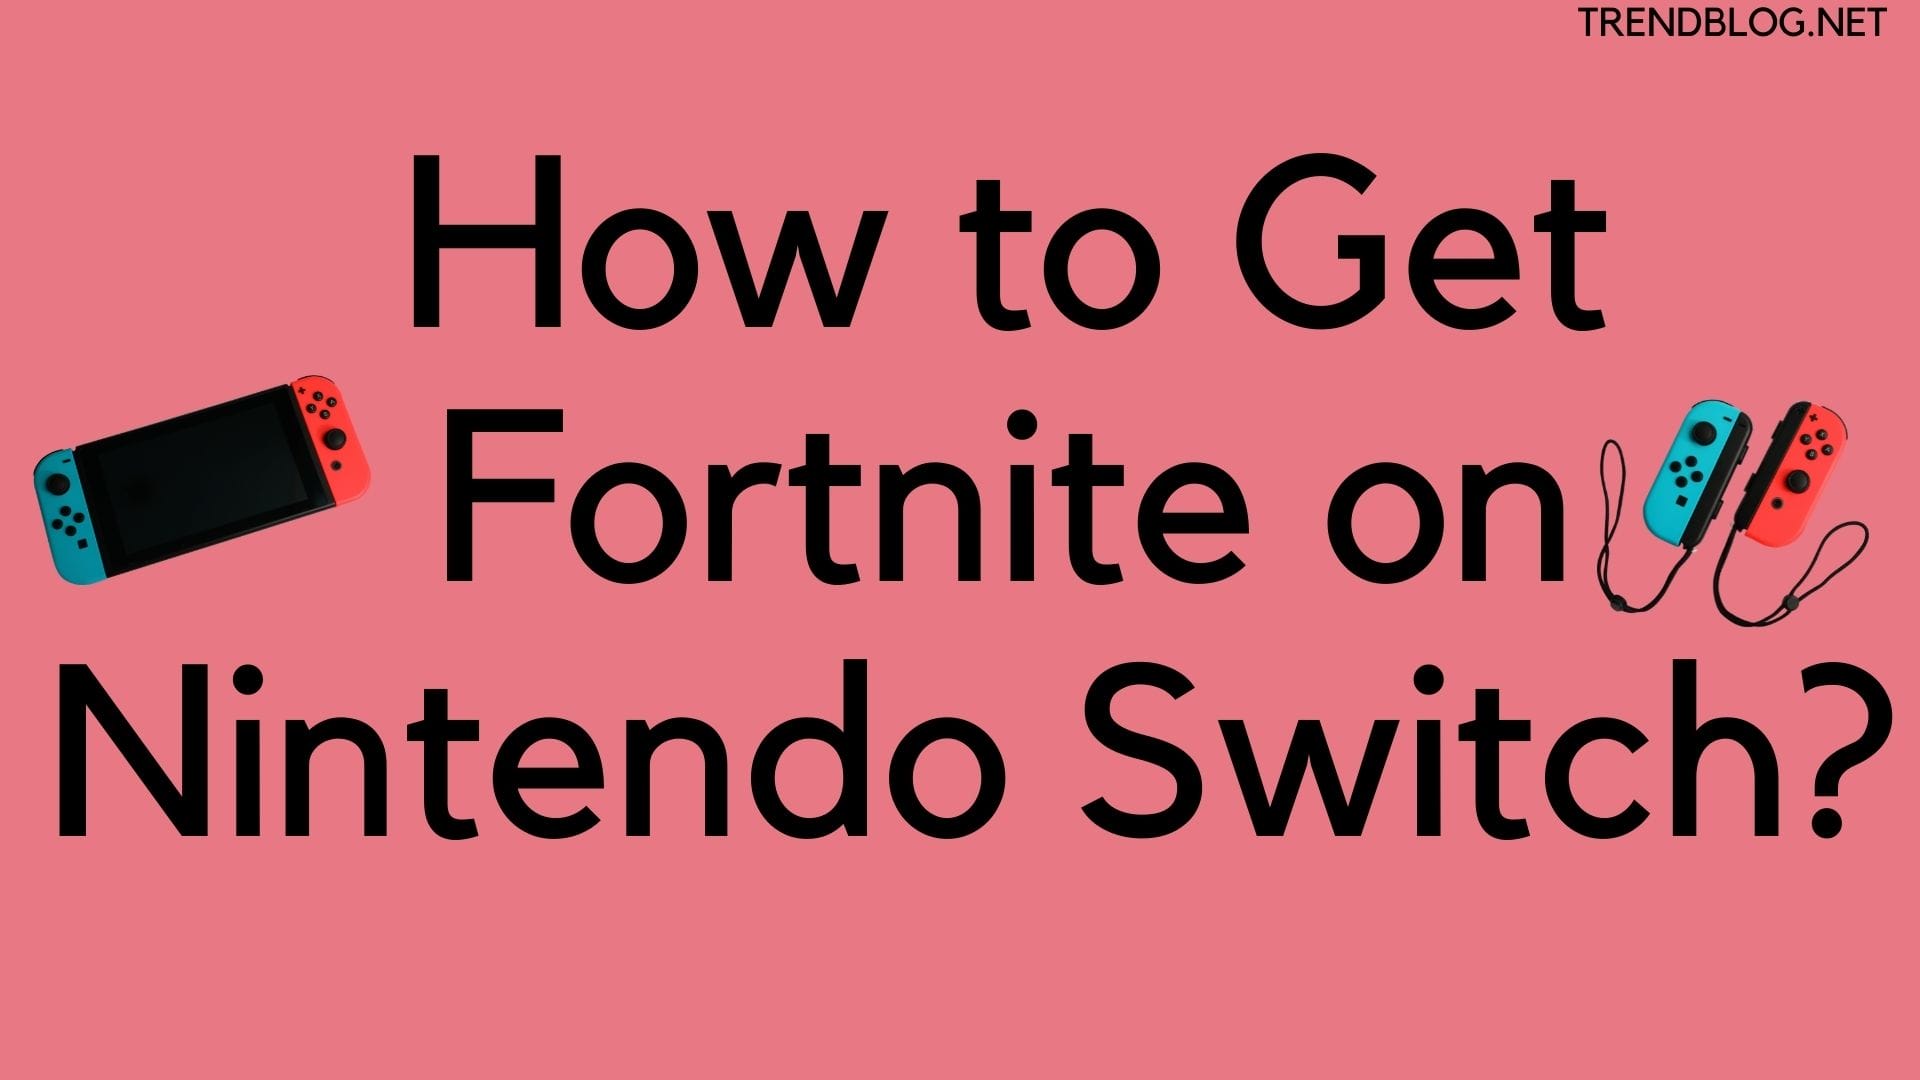 How to Get Fortnite on Nintendo Switch? 